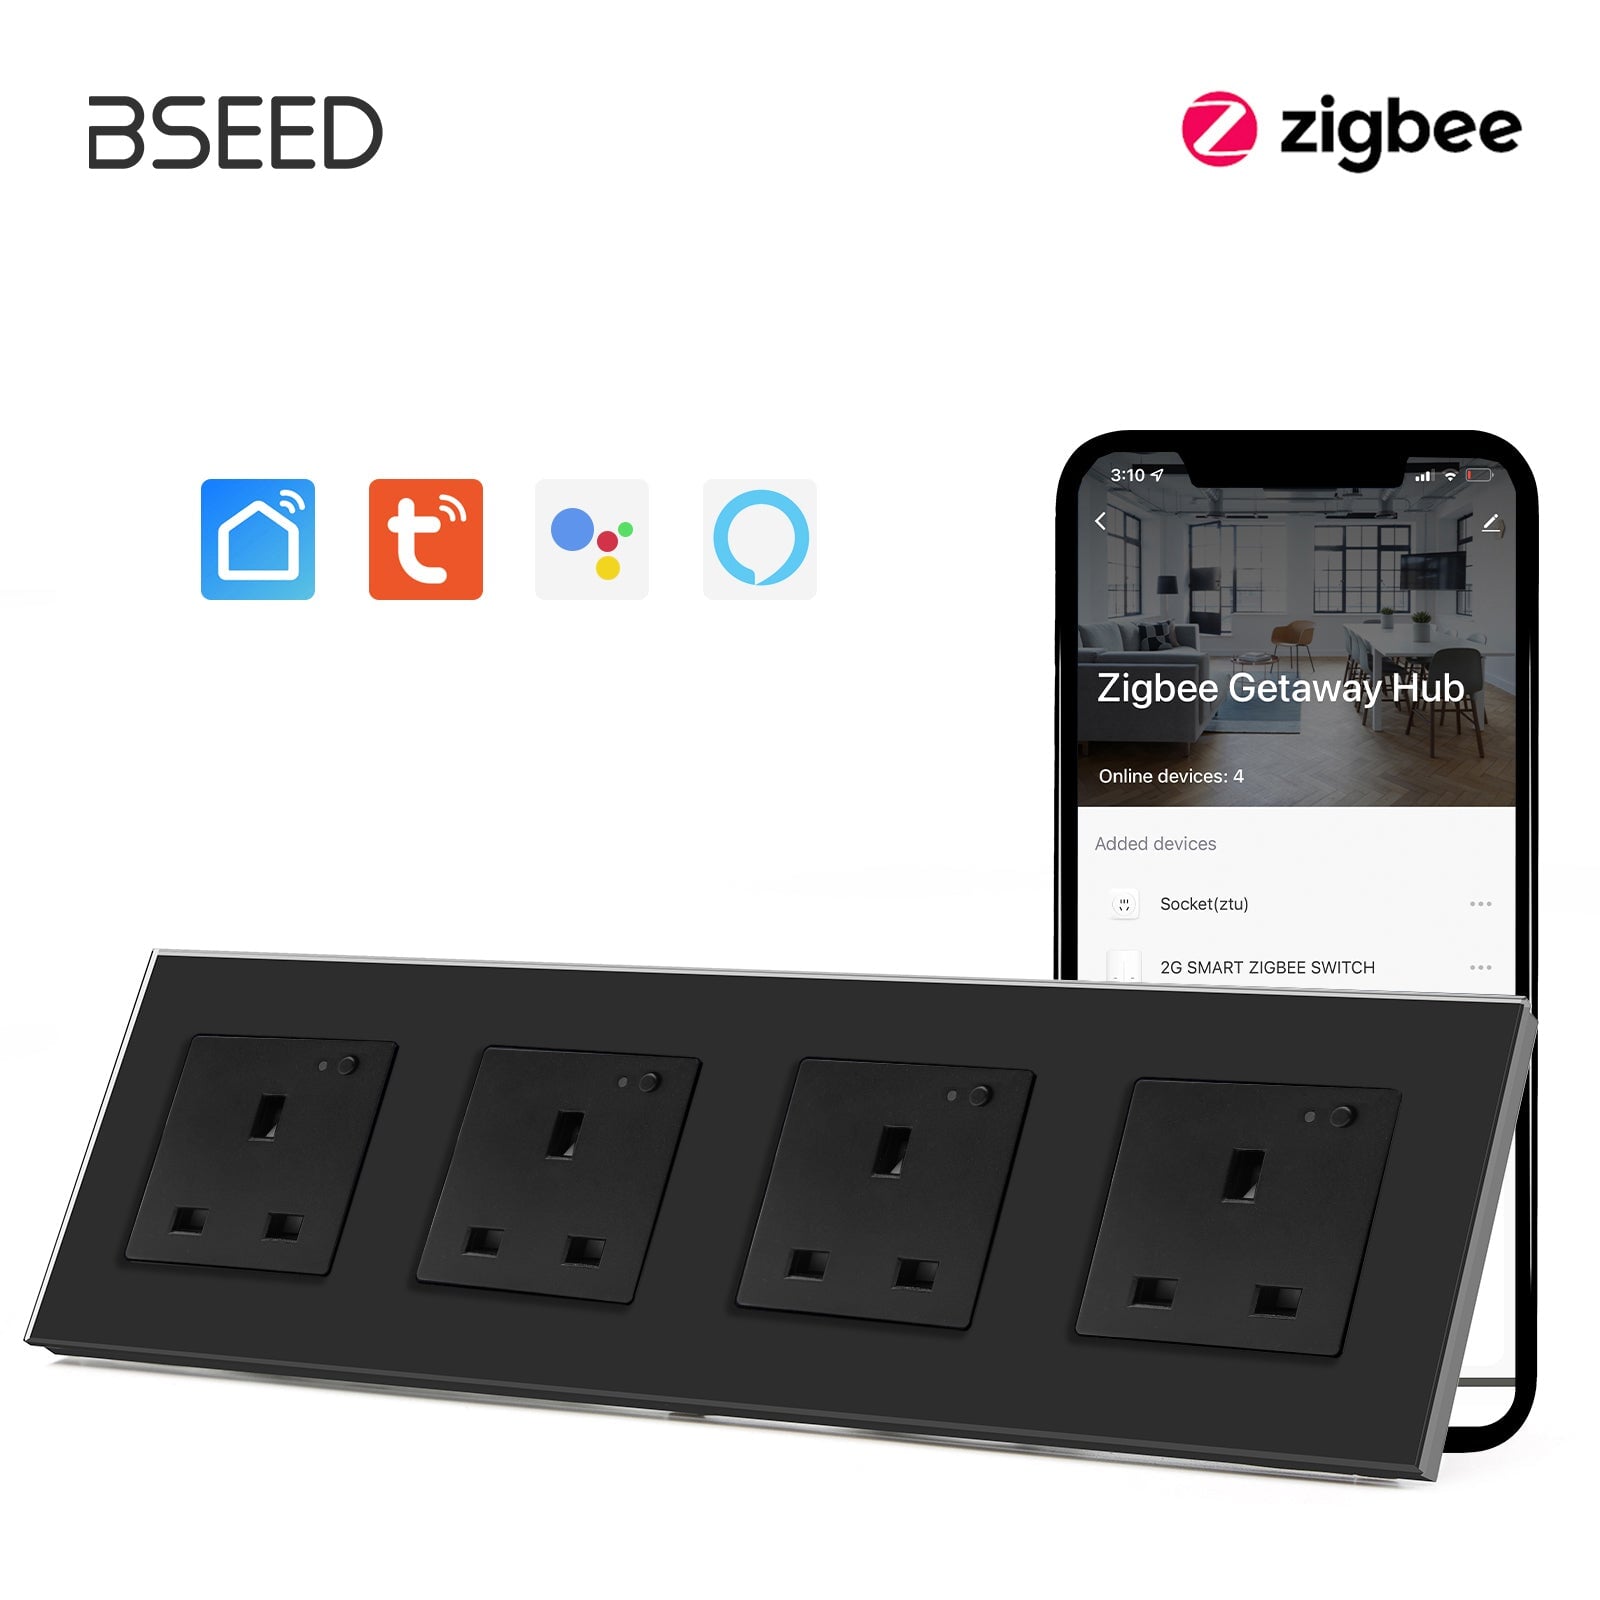 BSEED ZigBee UK Wall Sockets Power Outlets Kids Protection Wall Plates & Covers Bseedswitch black Quadruple 